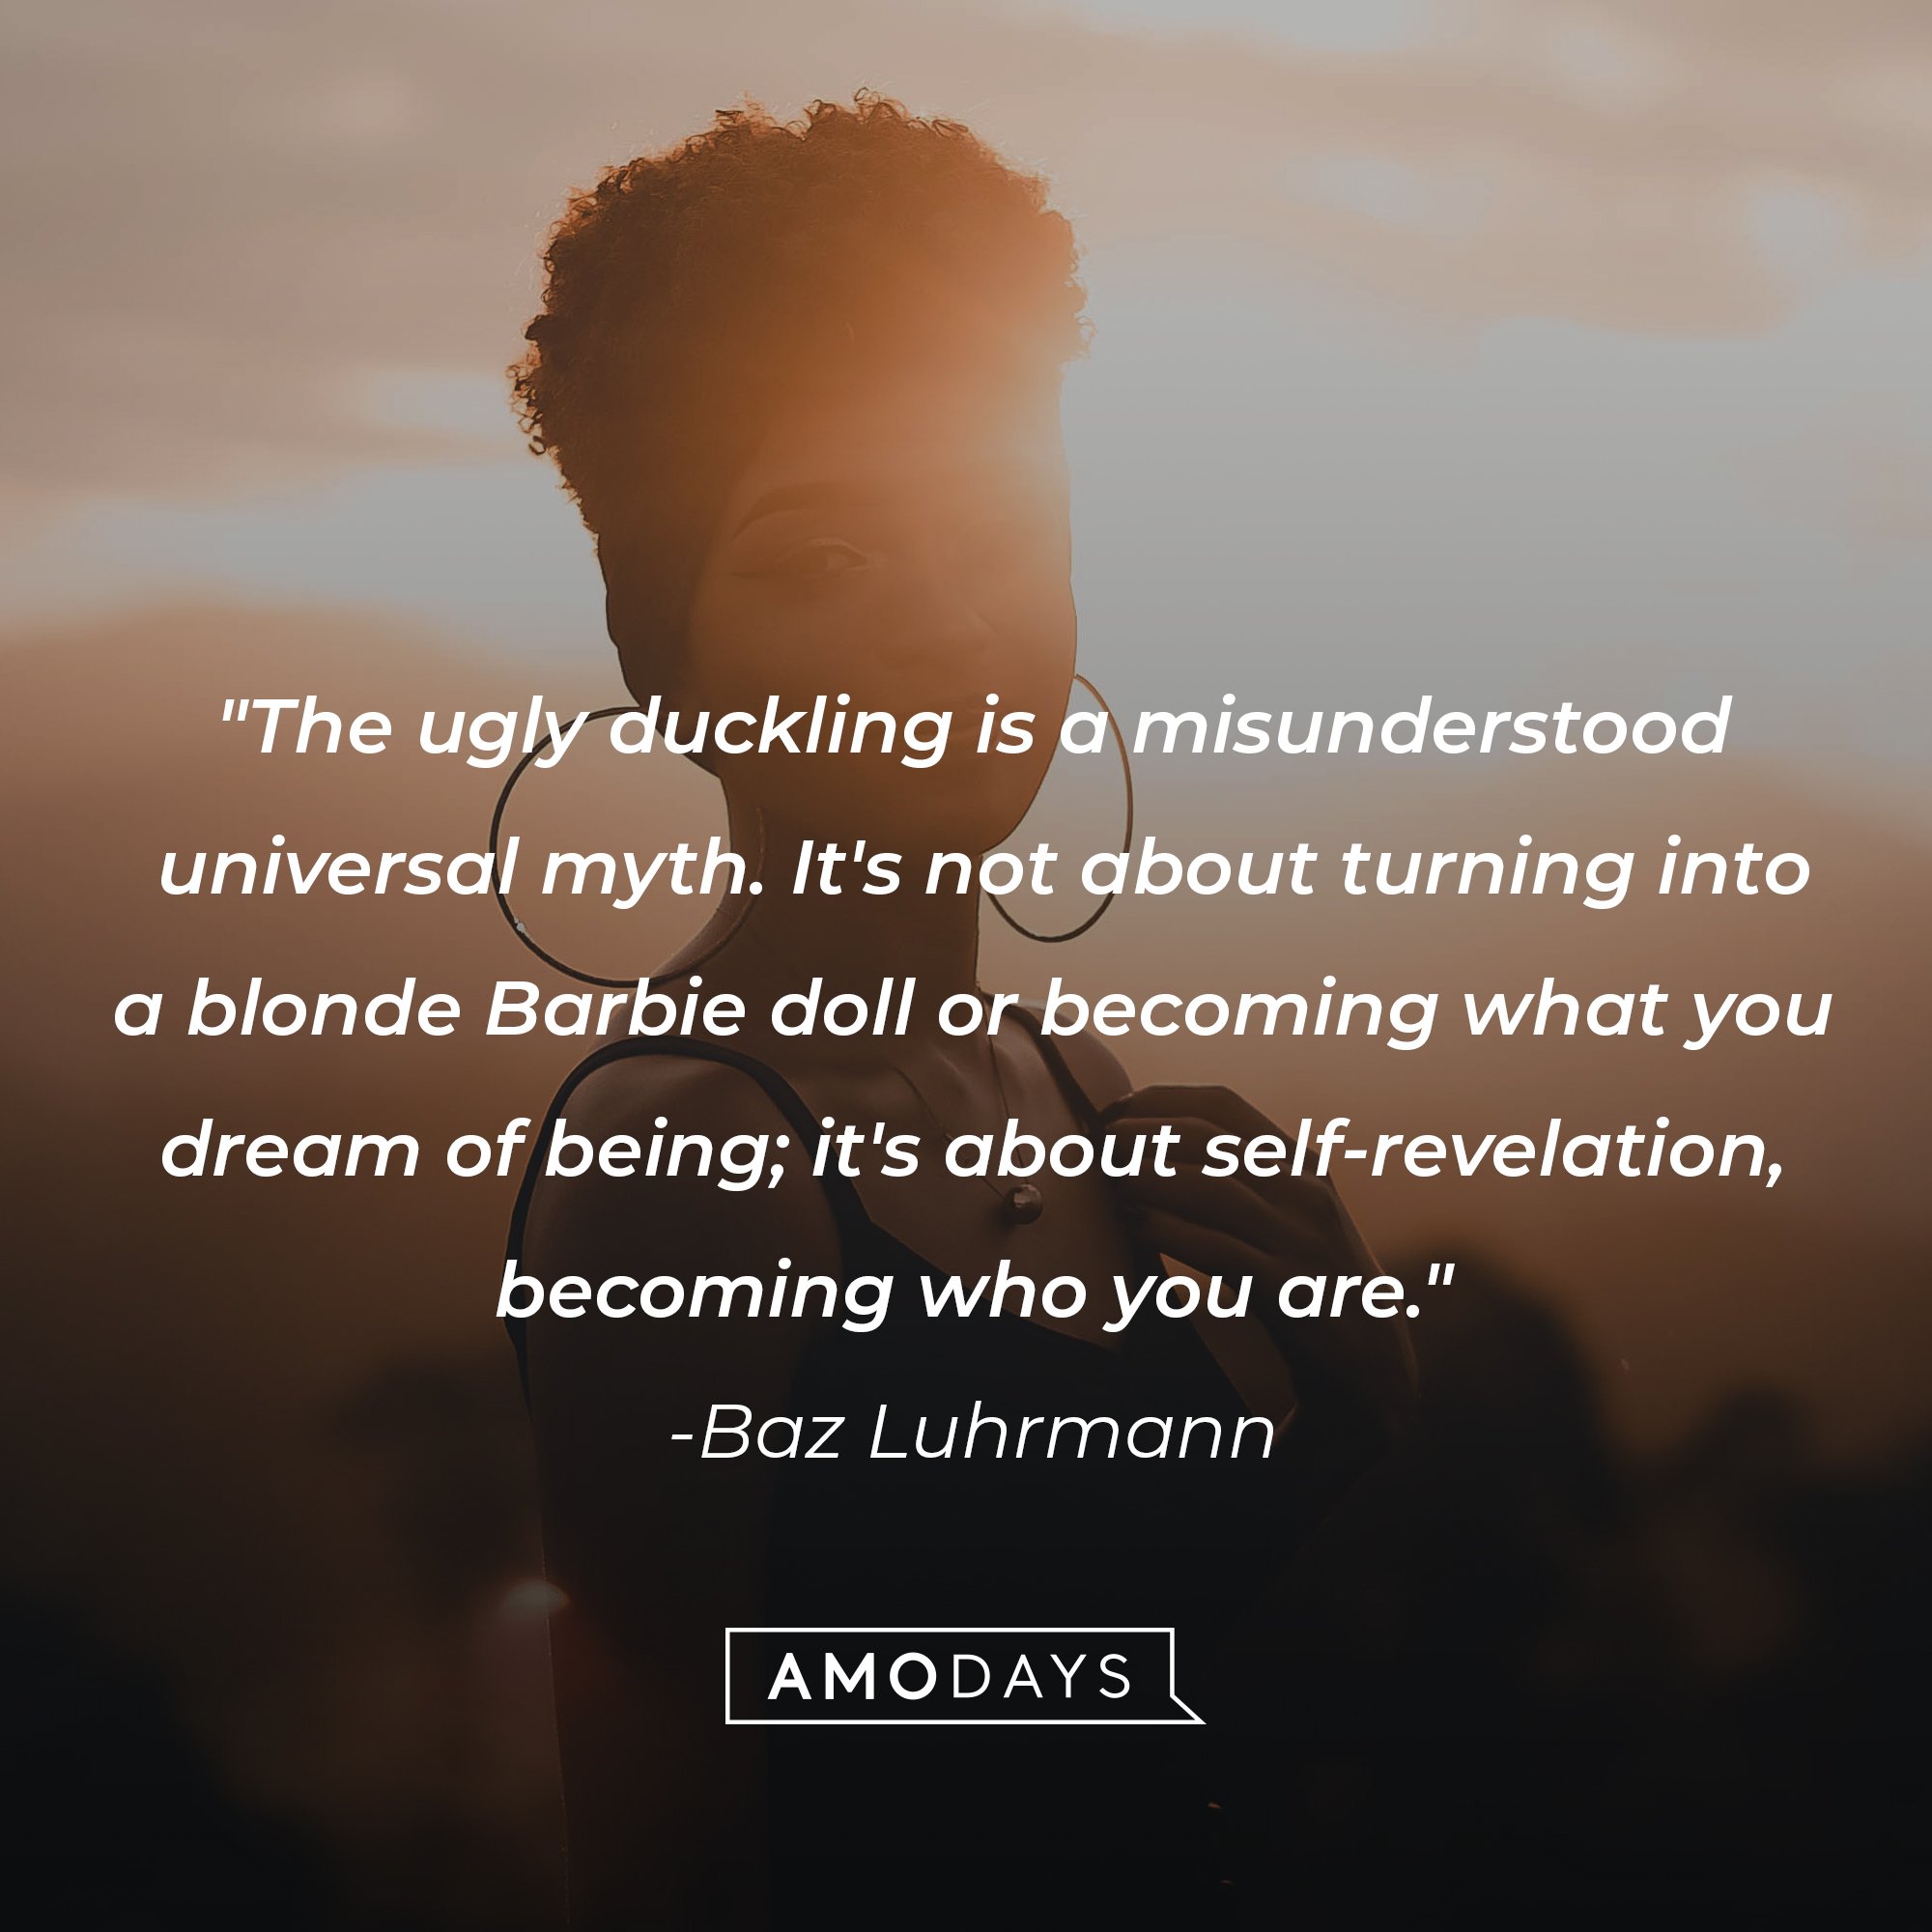 Baz Luhrmann’s quote: "The ugly duckling is a misunderstood universal myth. It's not about turning into a blonde Barbie doll or becoming what you dream of being; it's about self-revelation, becoming who you are." | Image: AmoDays 